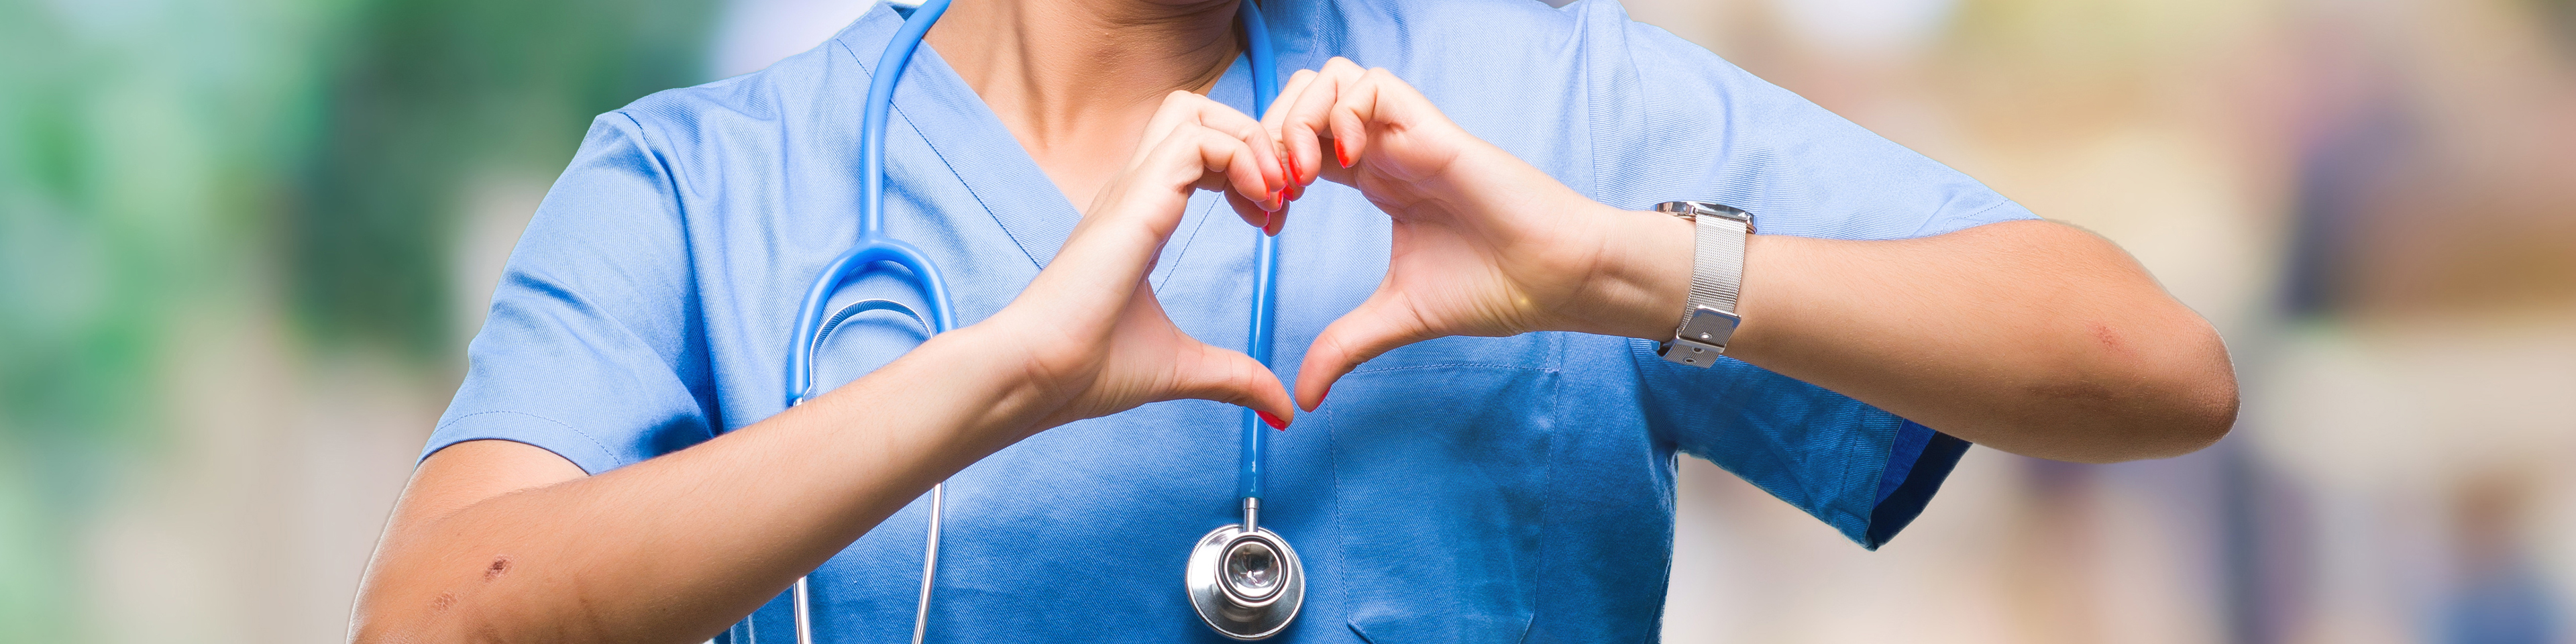 Woman in hospital scrubs smiling and showing heart symbol with her hands